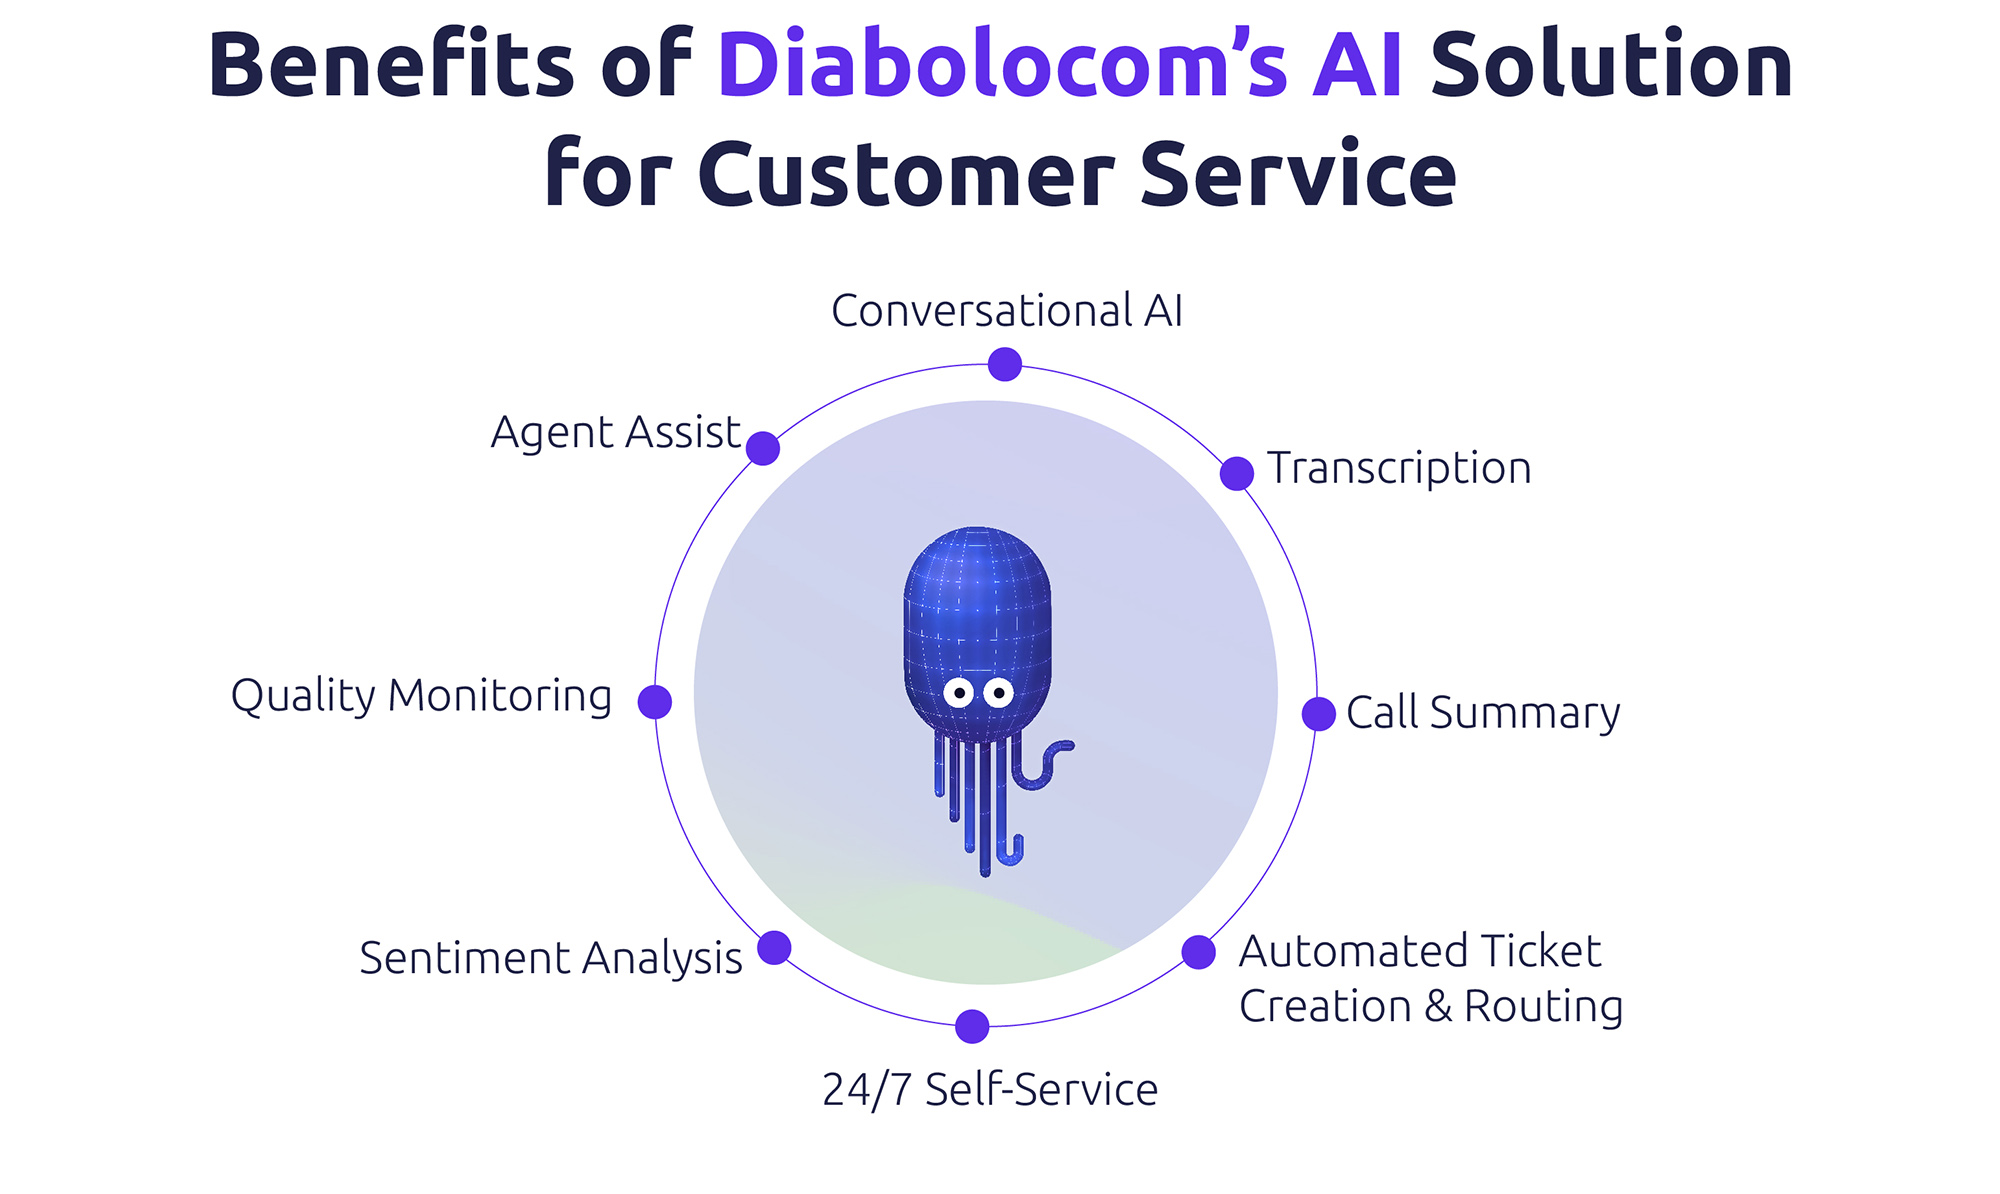 The benefits of the Diabolocom AI solution for customer service